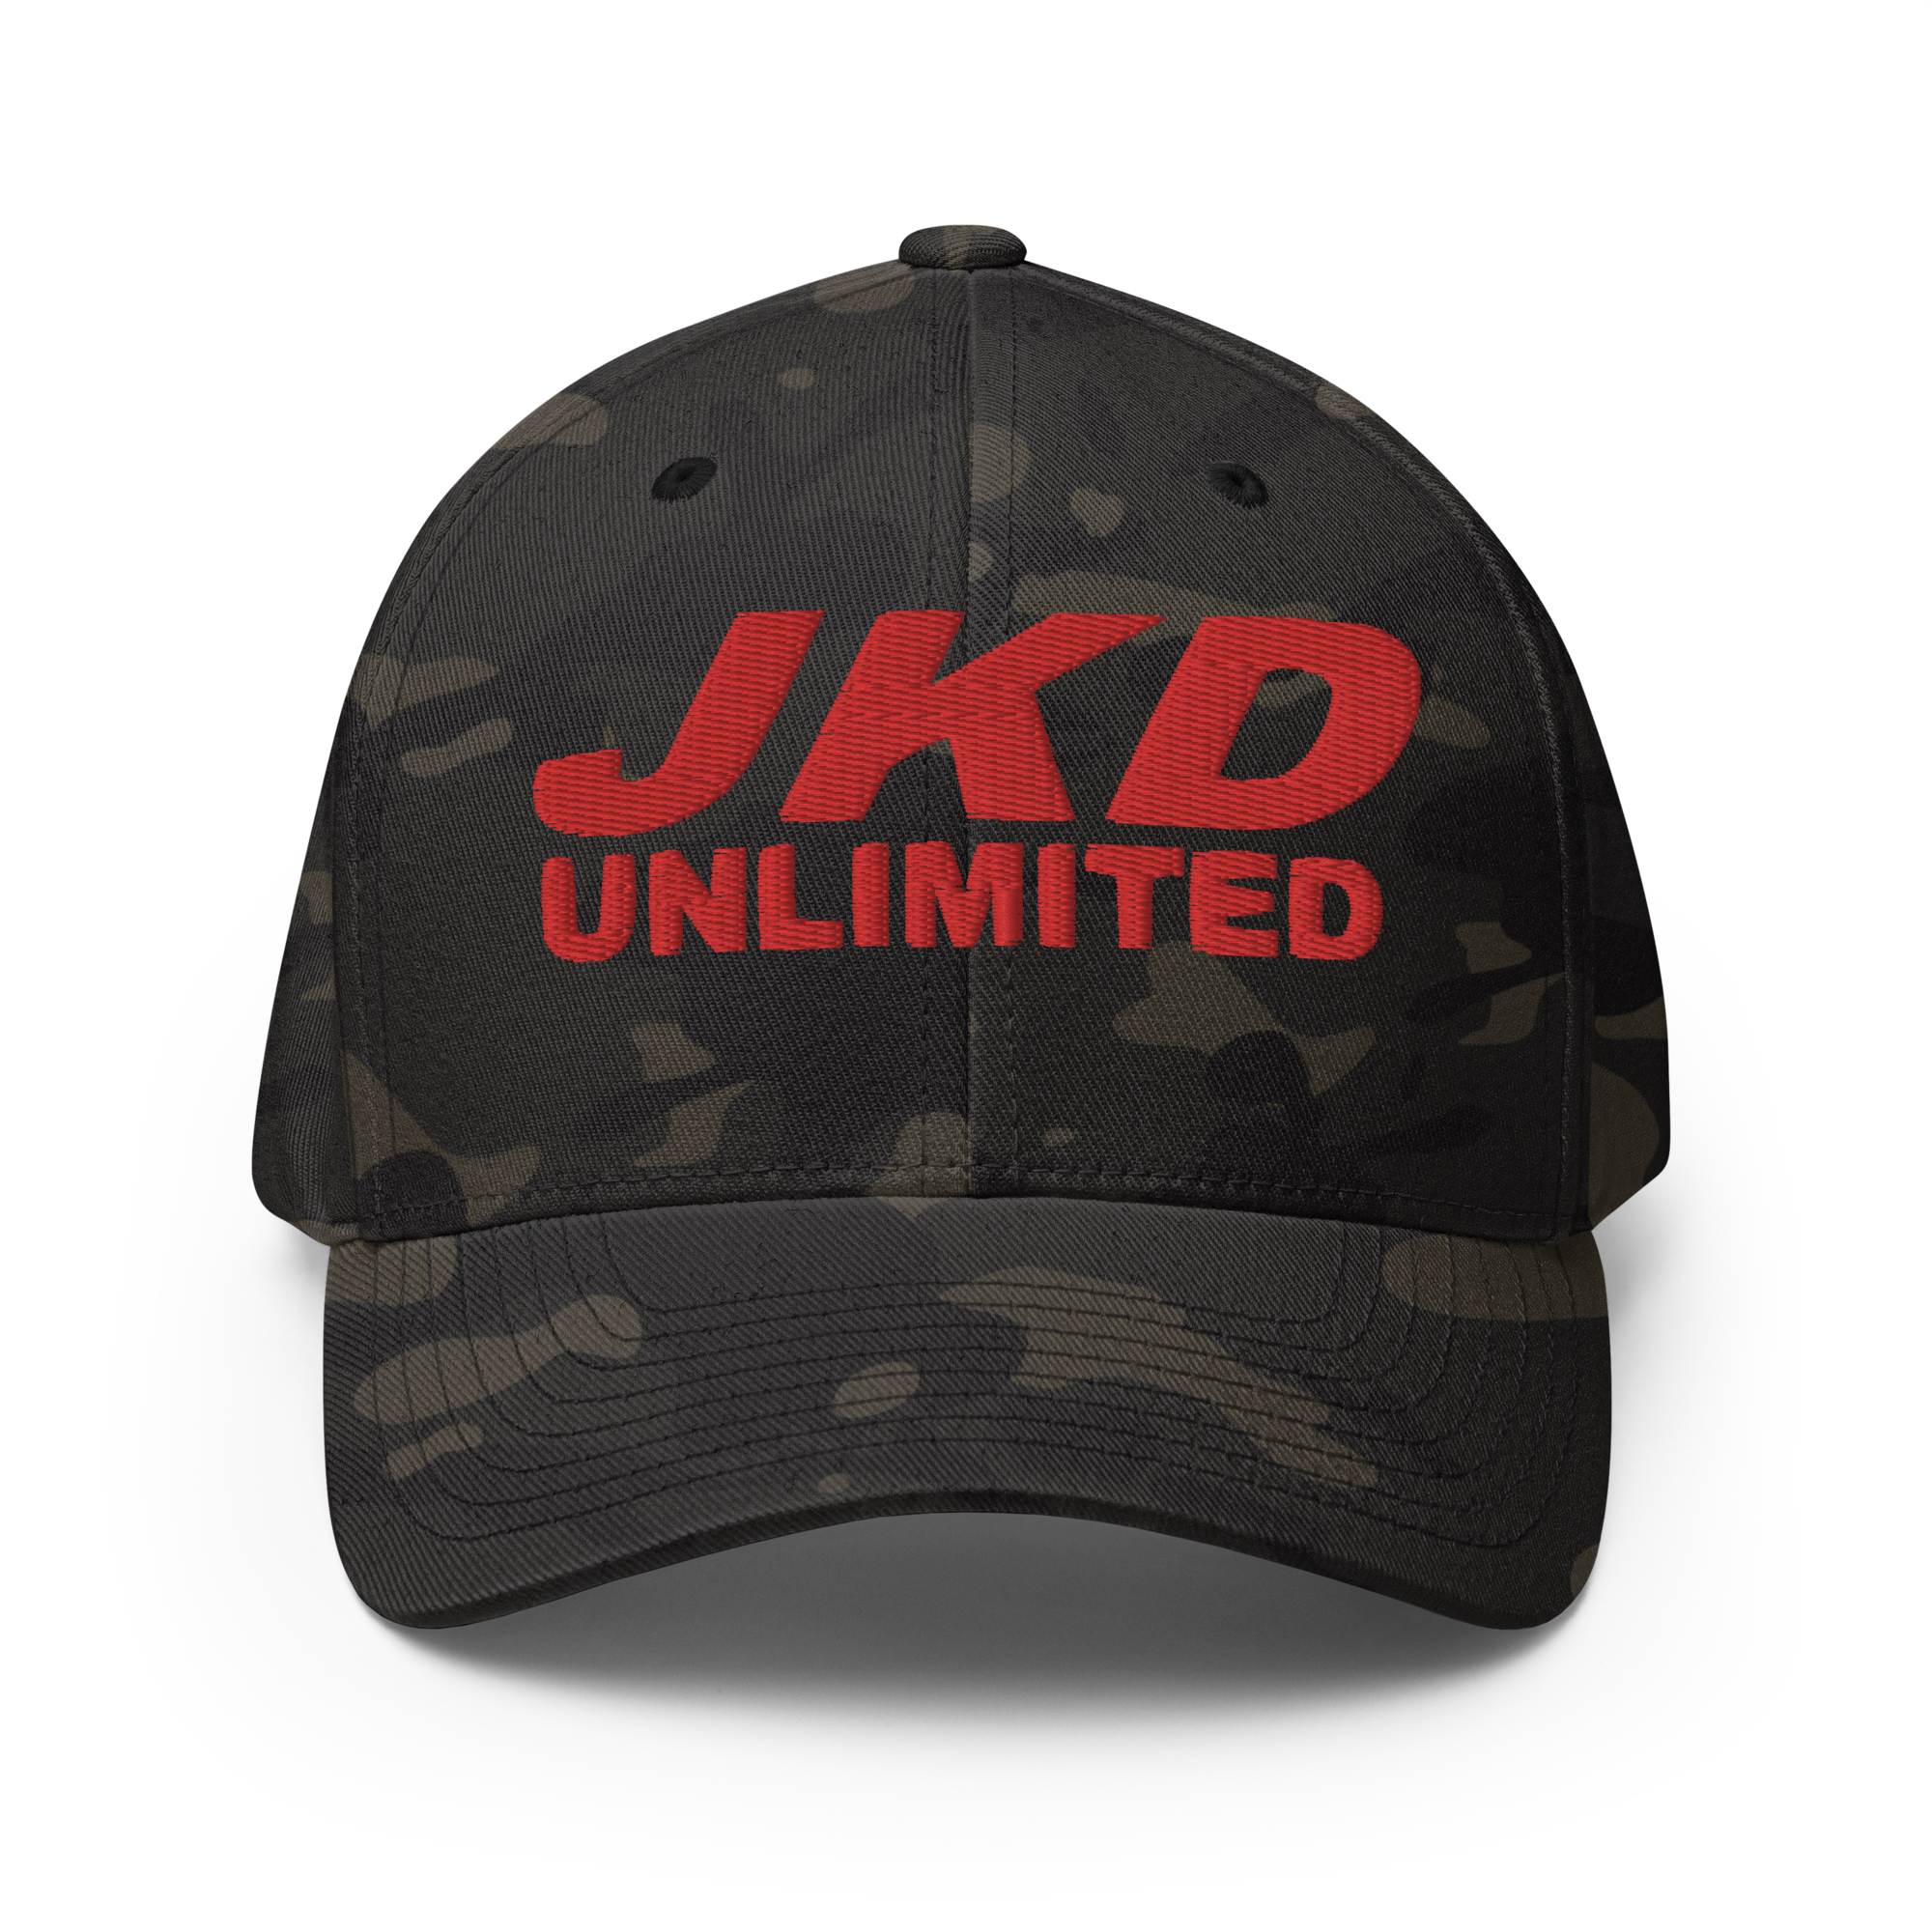 JKD Unlimited Sew On Patches